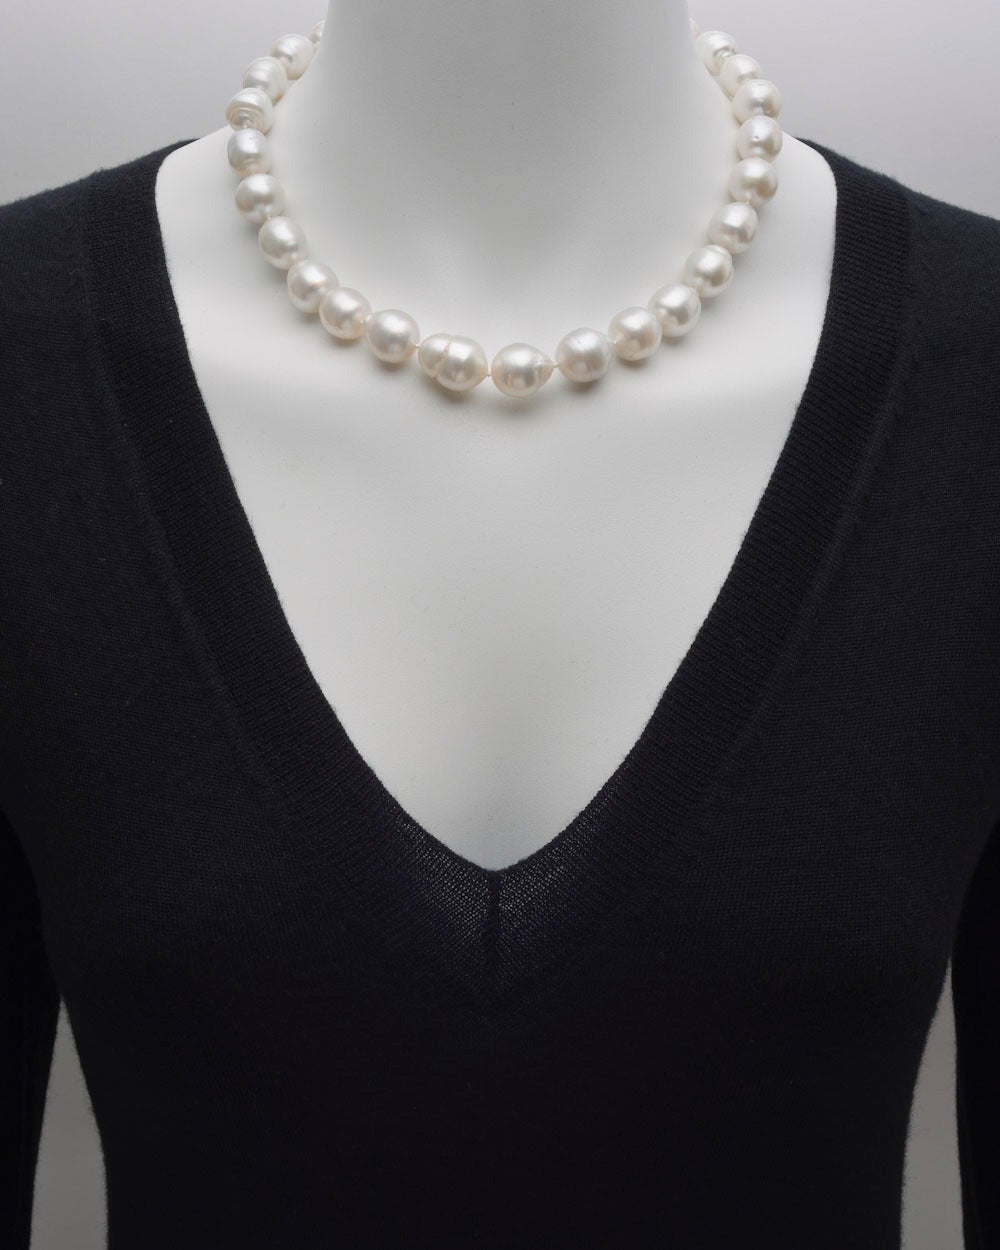 Graduated cultured baroque pearl necklace, composed of 28 pearls measuring approximately 12.5 to 15mm in diameter, secured by a pearl plunger-style clasp in 18k white gold, the clasp signed Seaman Schepps. 18